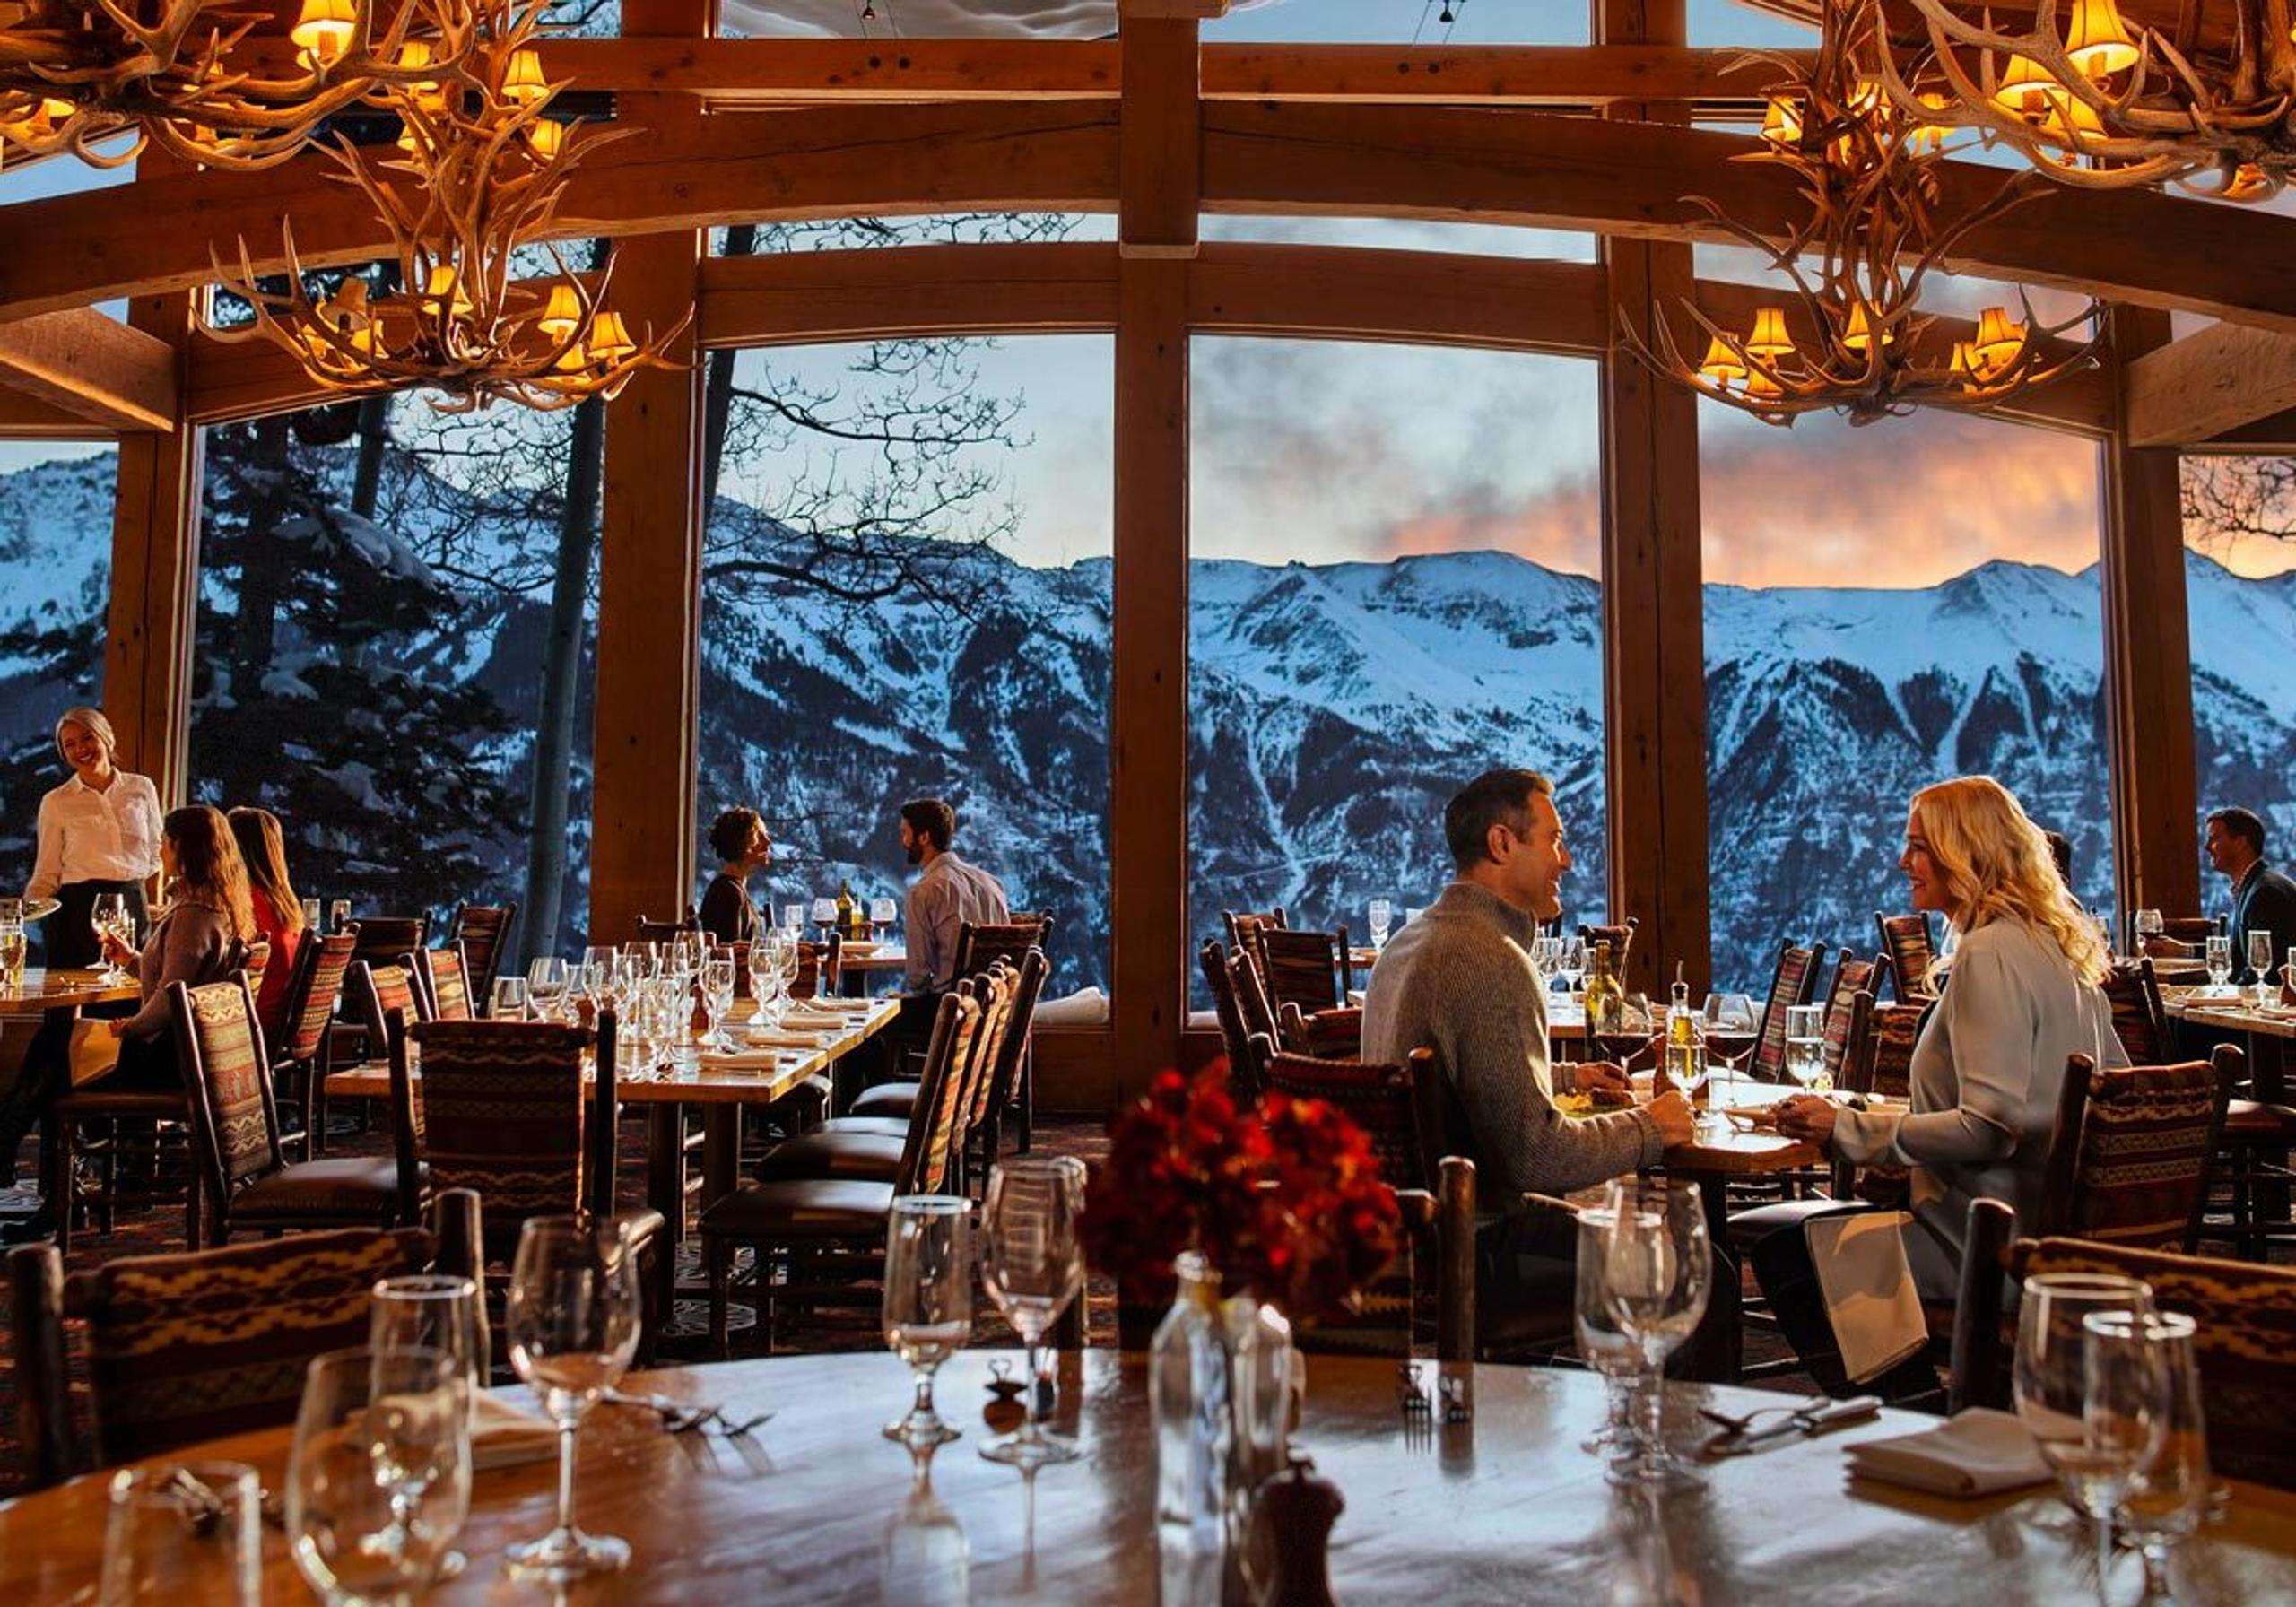 Interior view of people dining in Allred's restaurant with mountains viewed in background